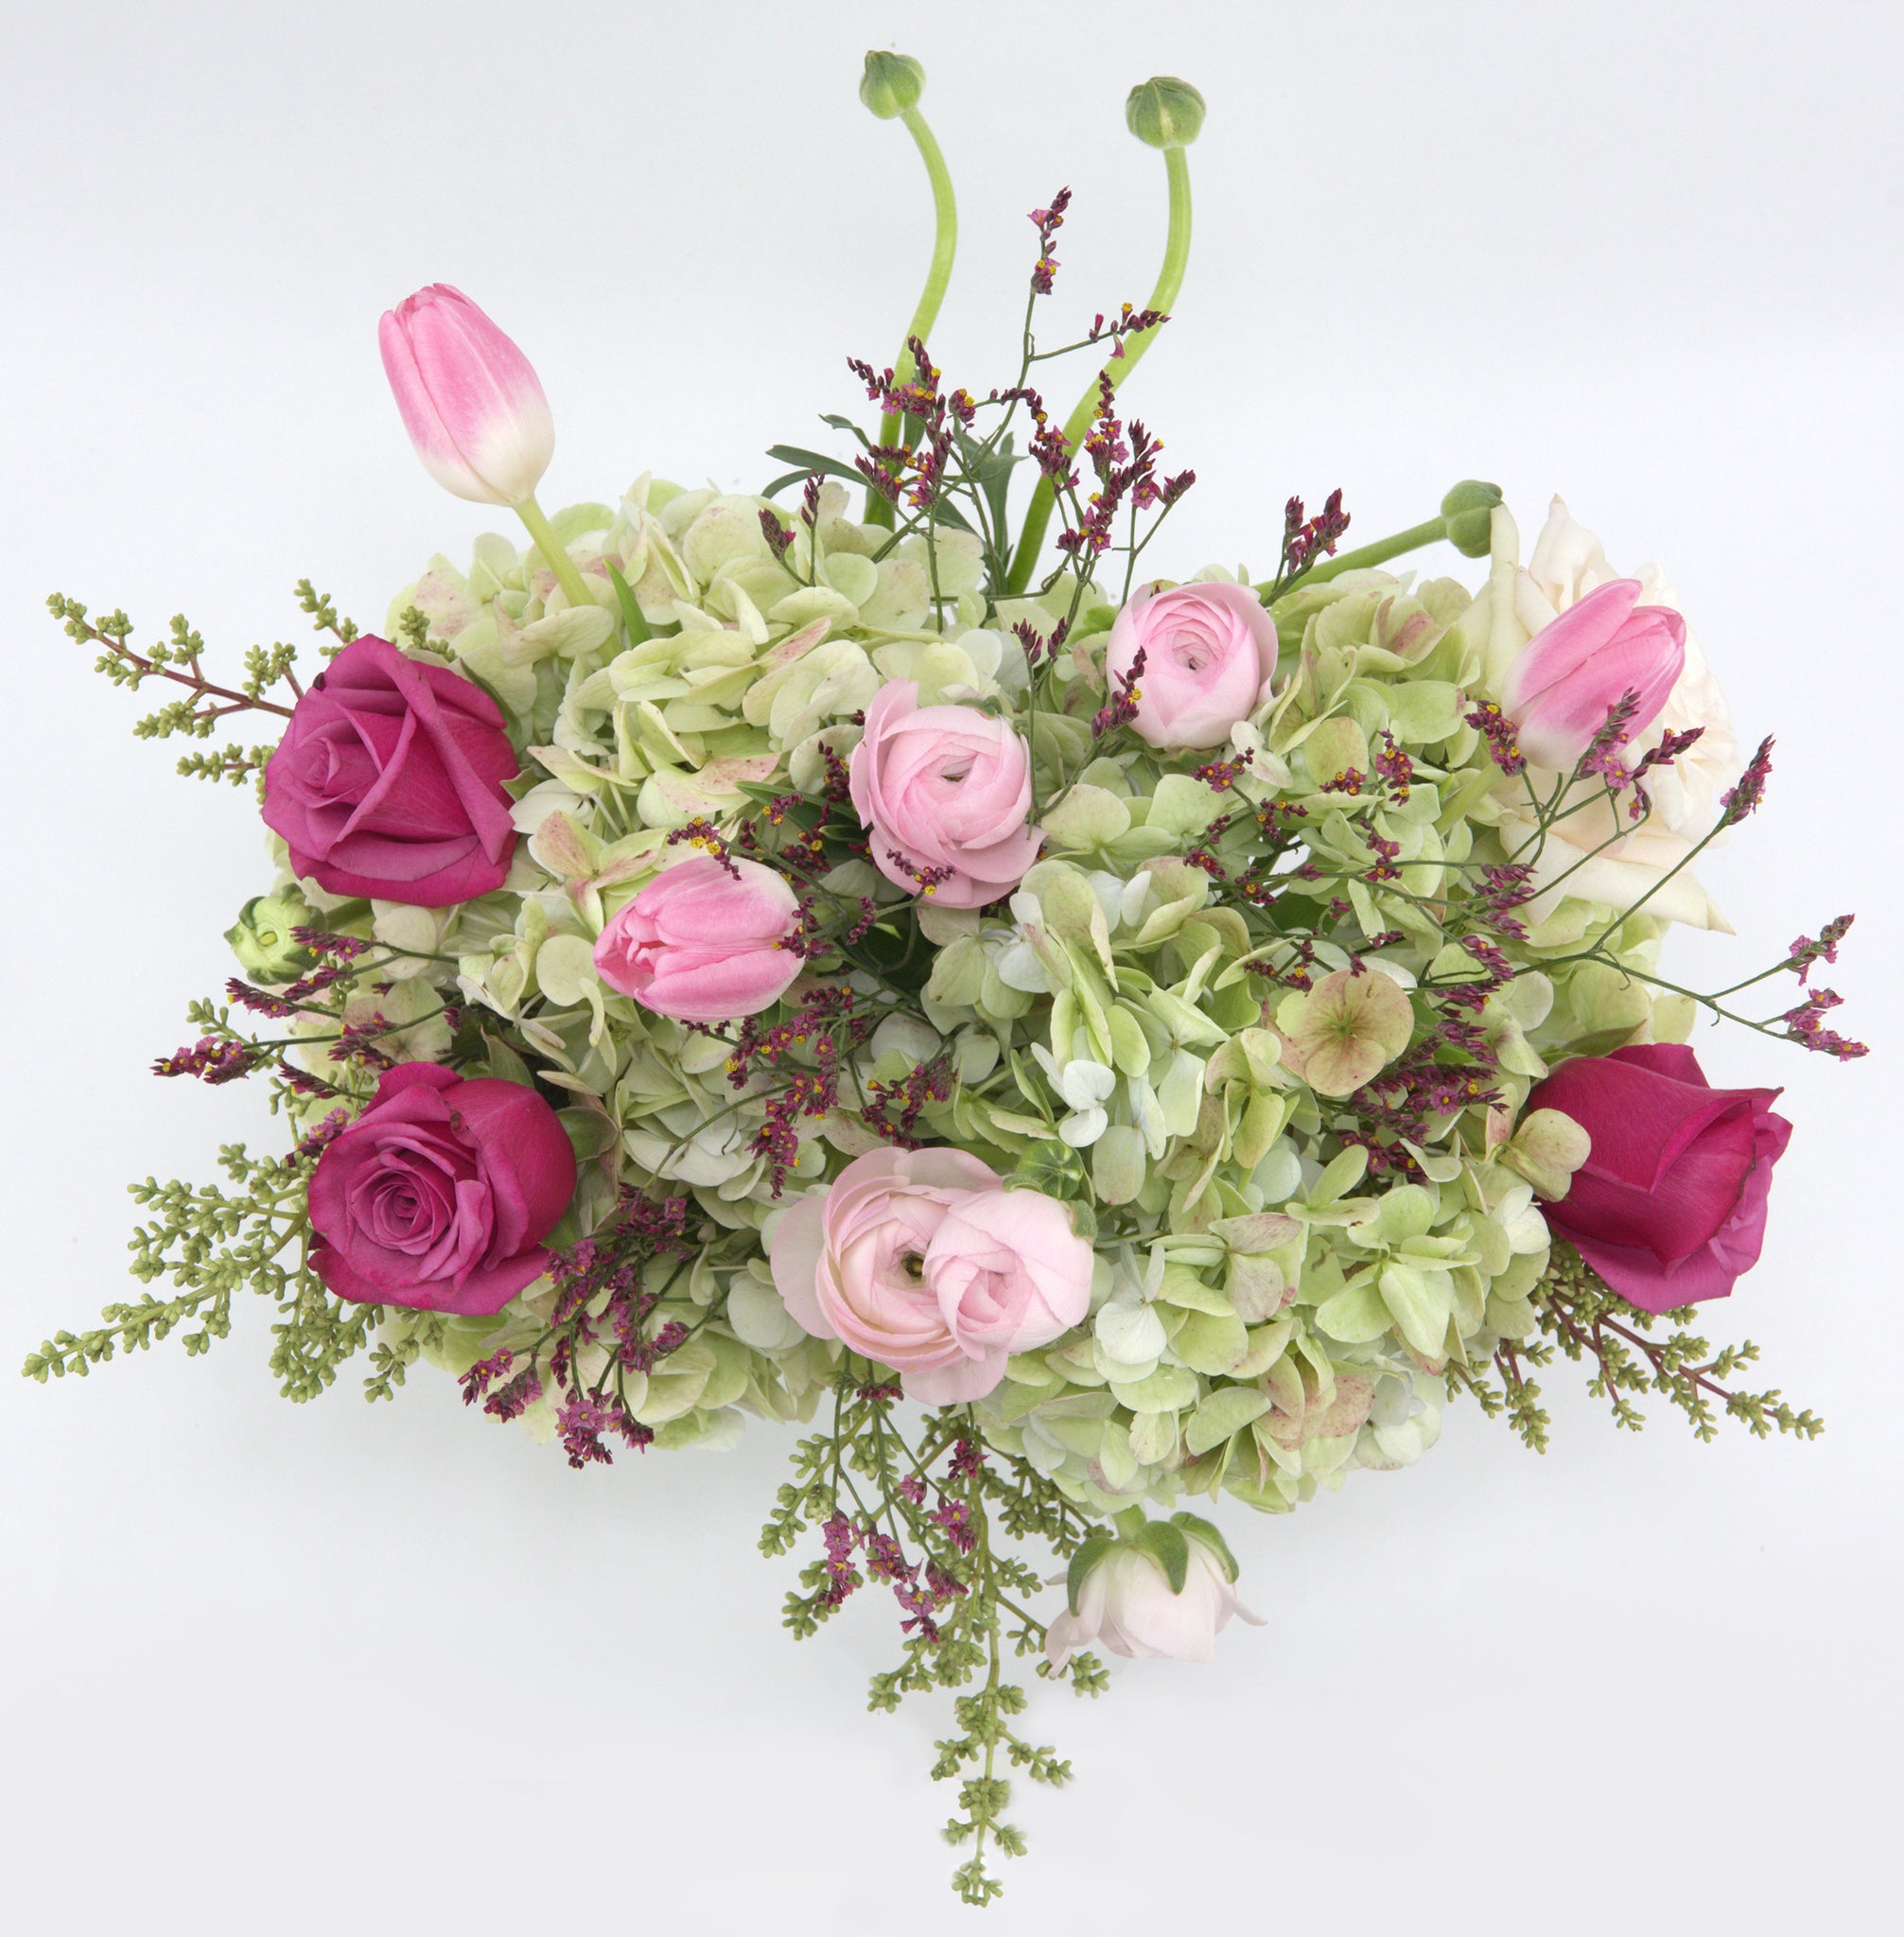 Blooms of Hope by Flower Co. is a floral design in shades of green, pink and fuchsia featuring premium flowers such as hydrangeas, roses, ranunculus, tulips, limonium and foliage. Made by local florists with same-day deliveries in Toronto and Southern Ontario.